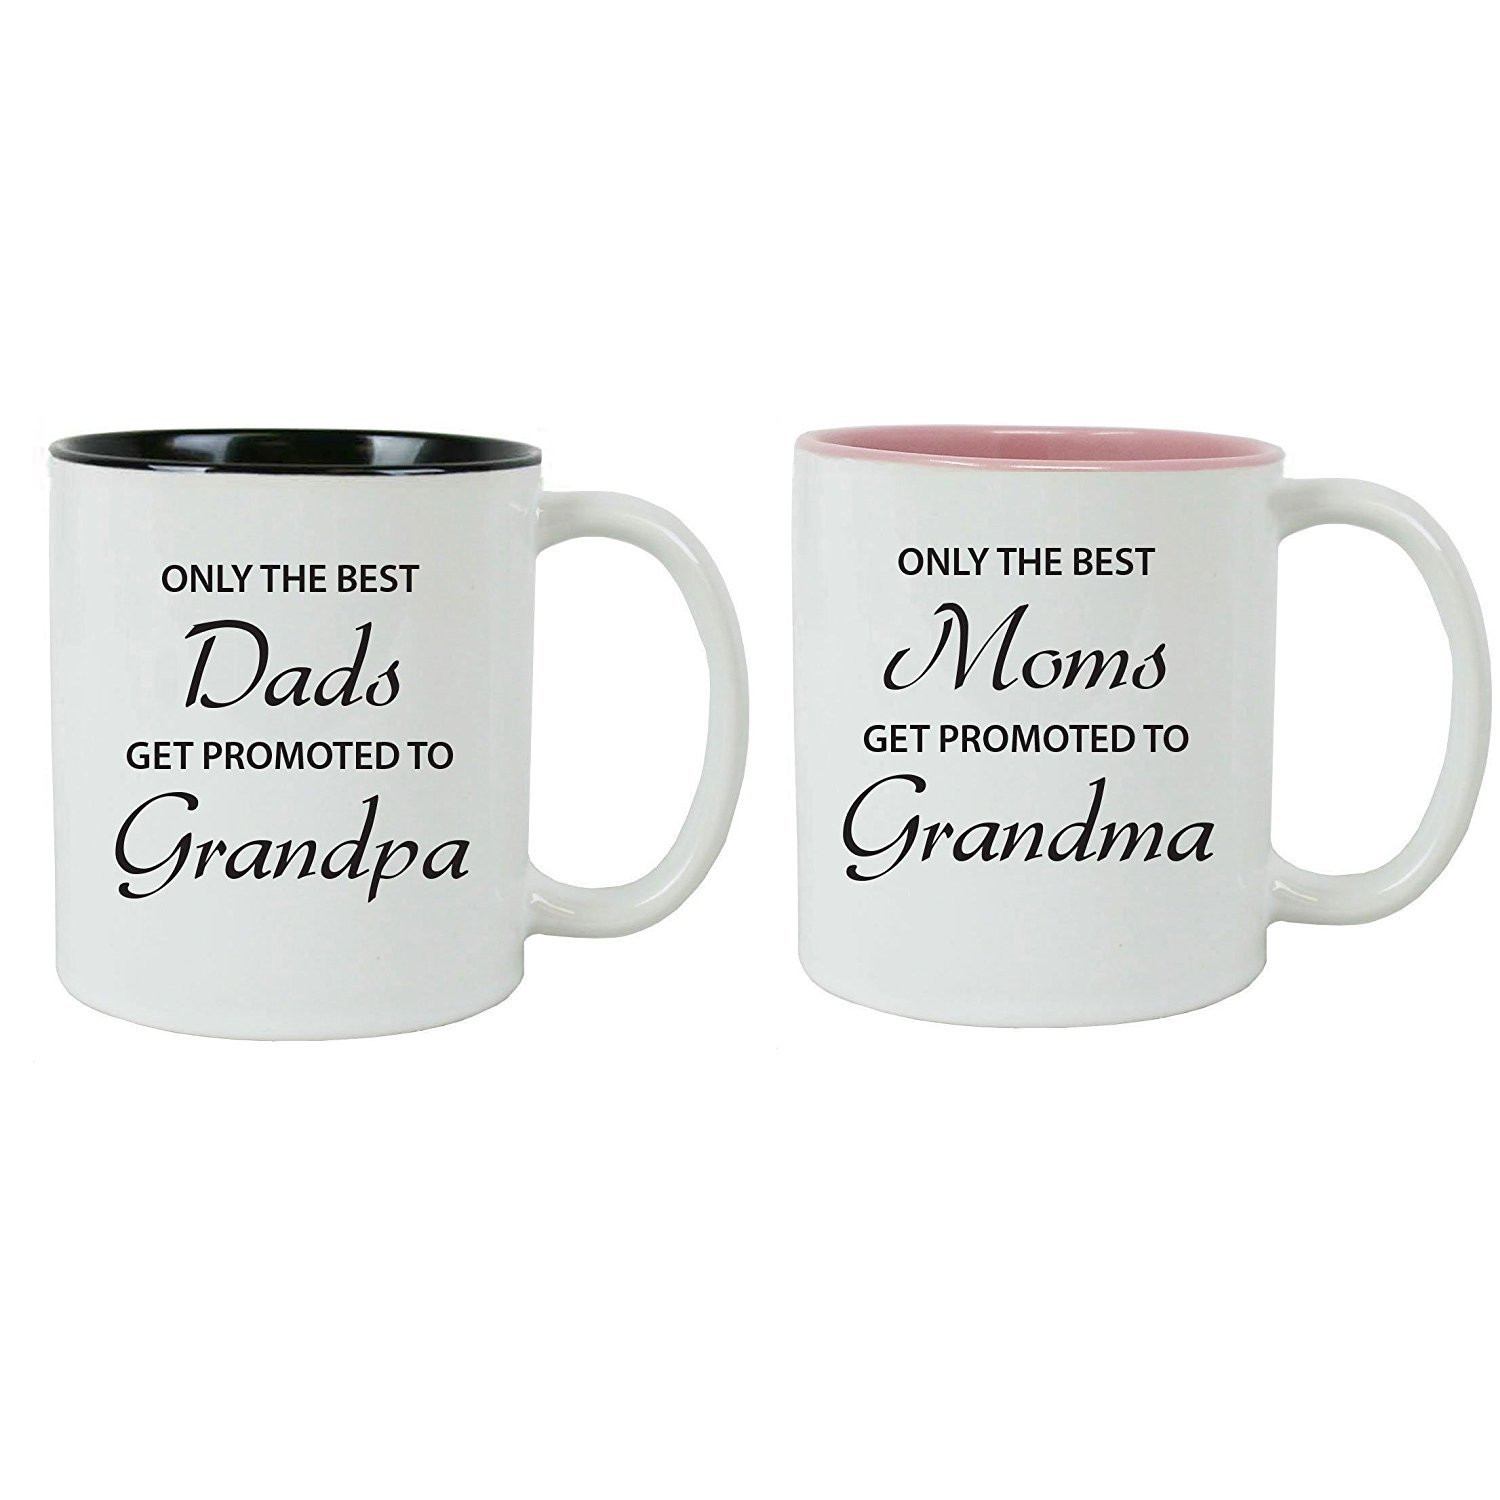 Gift Ideas For New Grandbaby
 Best Gifts For Grandparents Reviews of 2019 at TopProducts